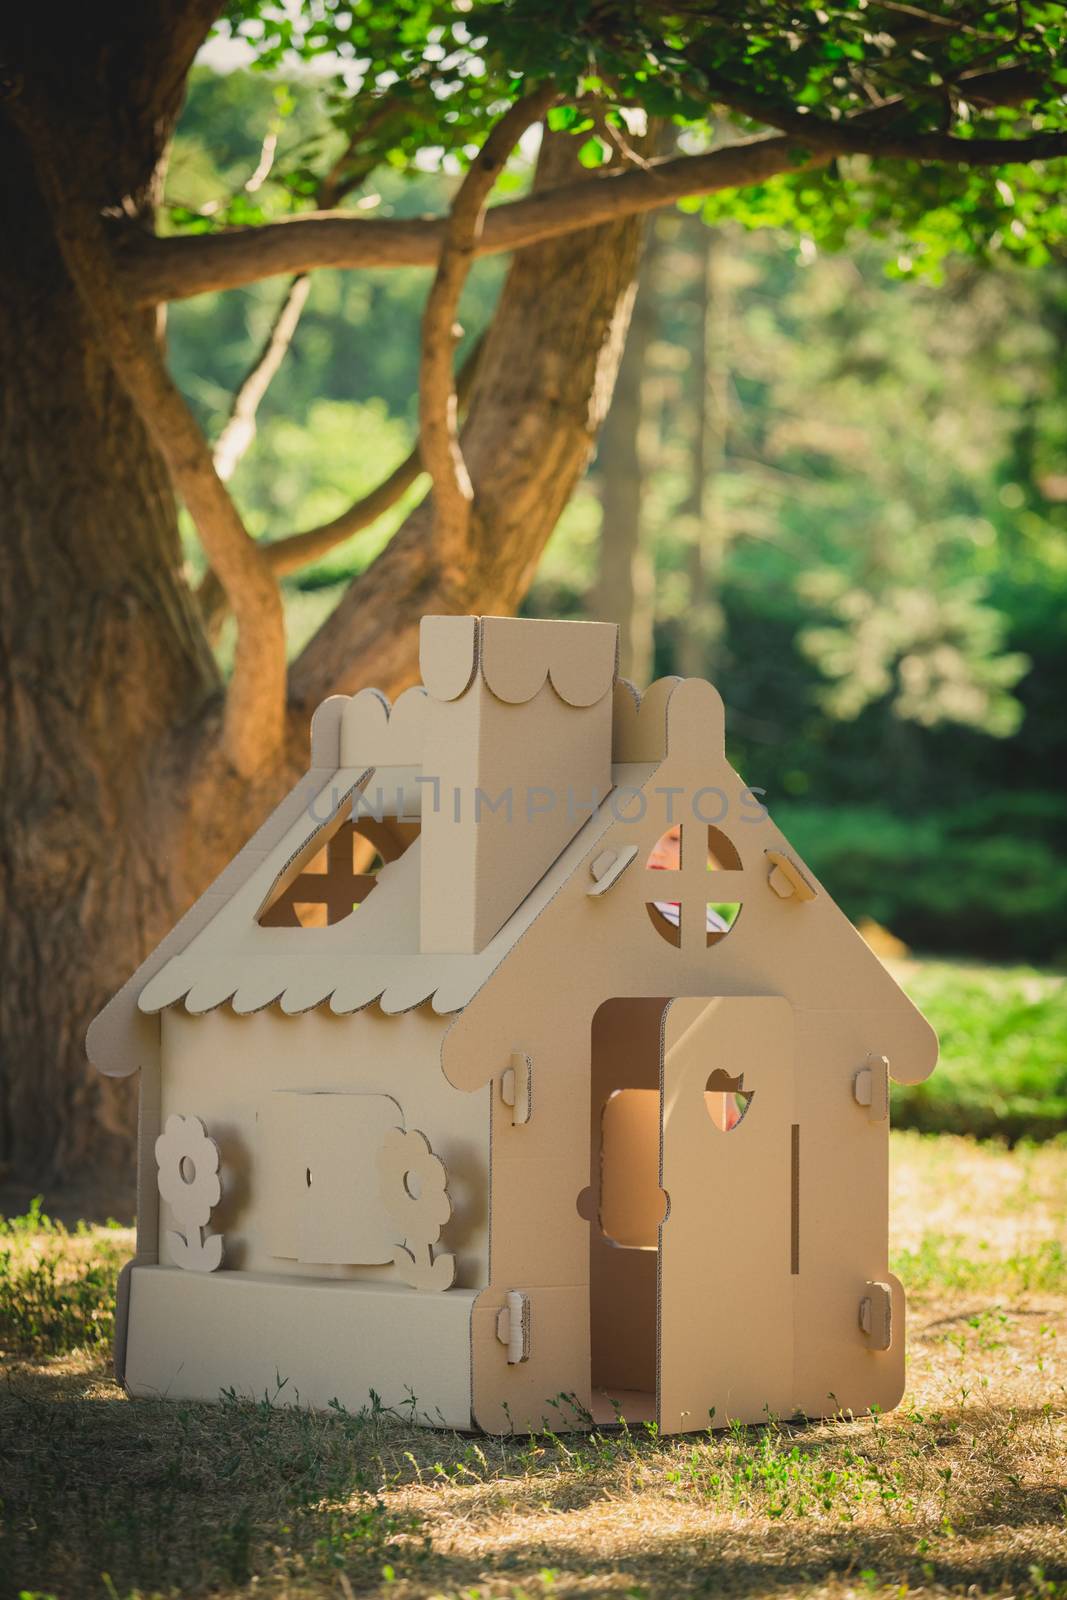 Toy house made of corrugated cardboard in the city park on the grass. The concept of eco-estate